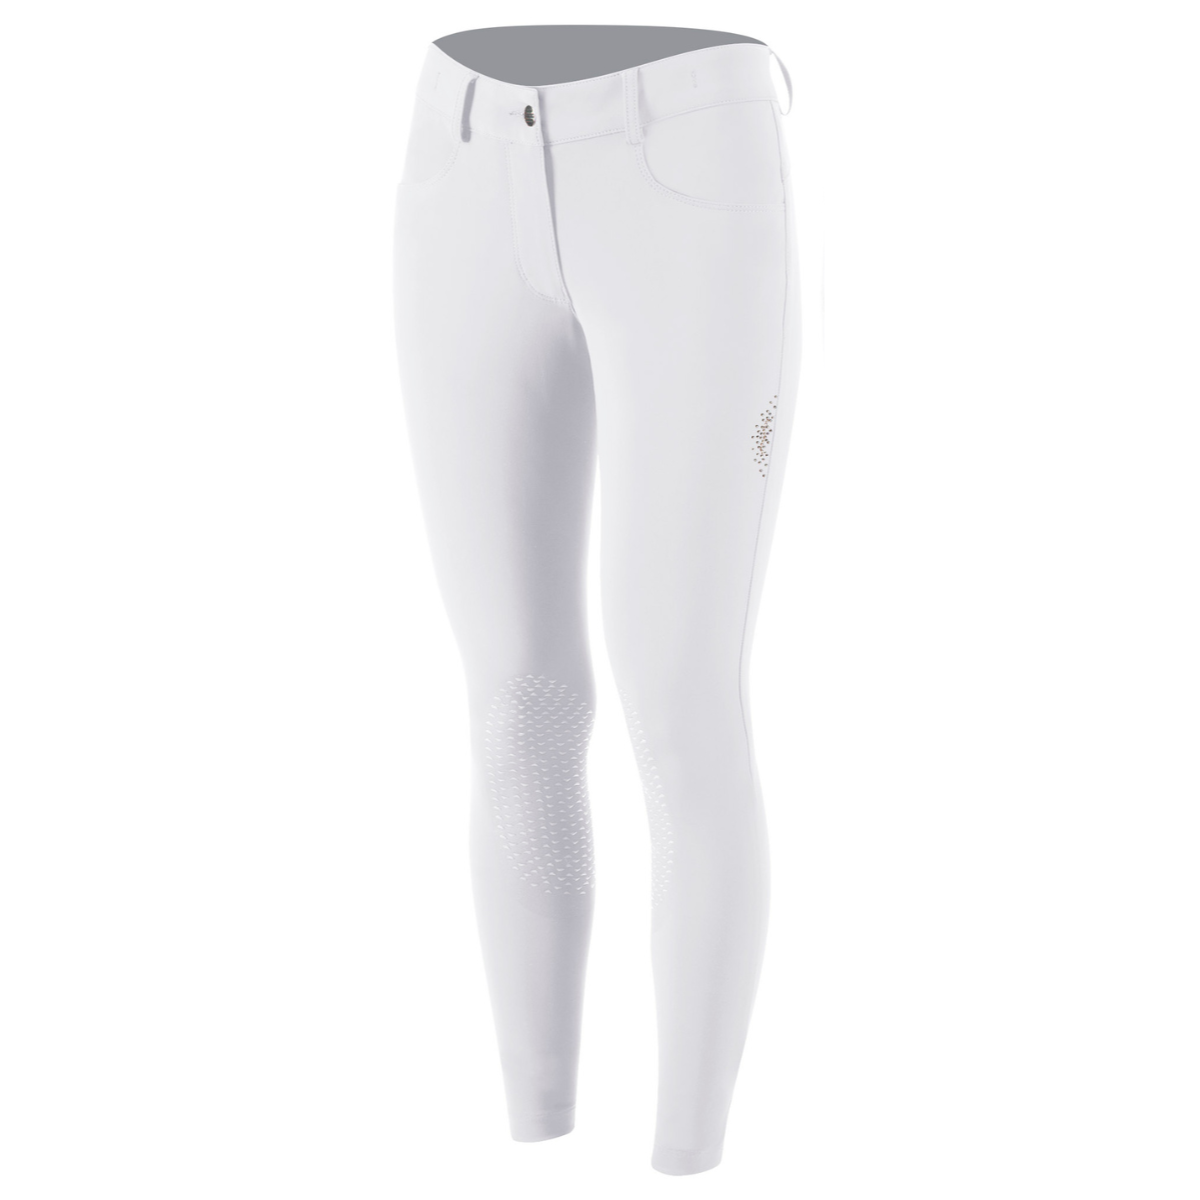 Animo 'Nonce' Breeches in Bianco